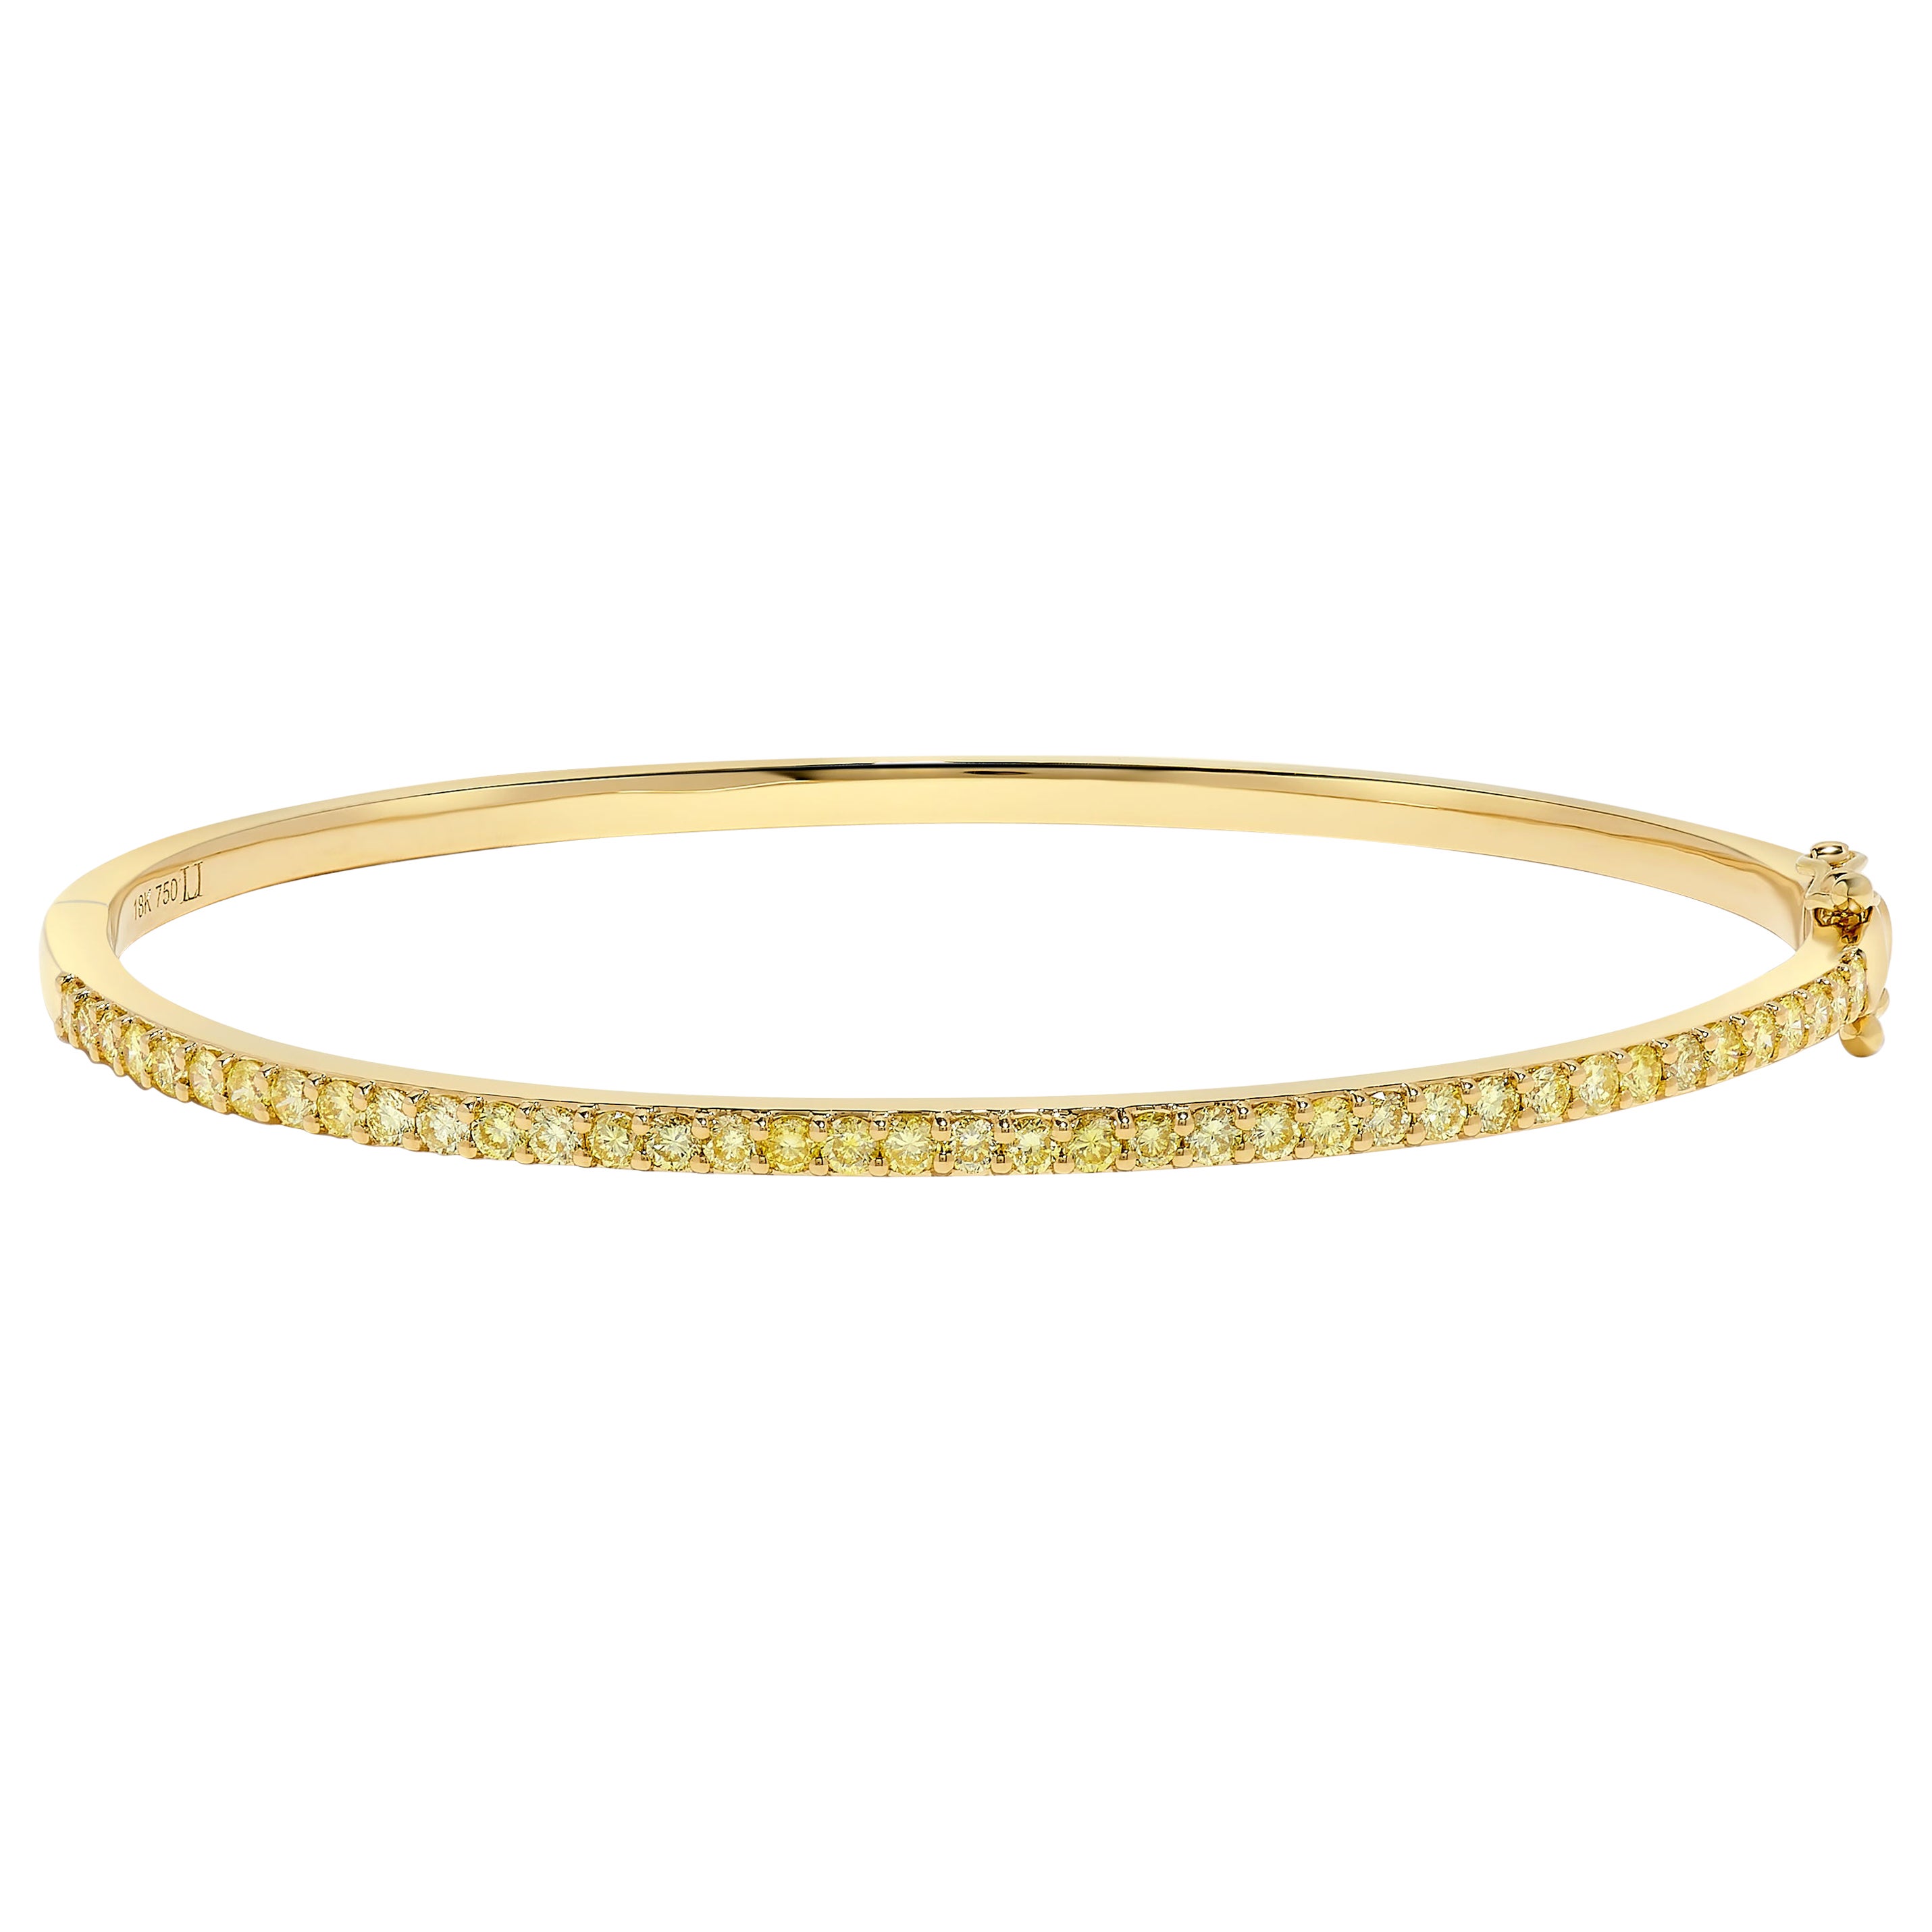 Natural Yellow Round Diamond 1.21 Carat TW Yellow Gold Cuff Bracelet For Sale